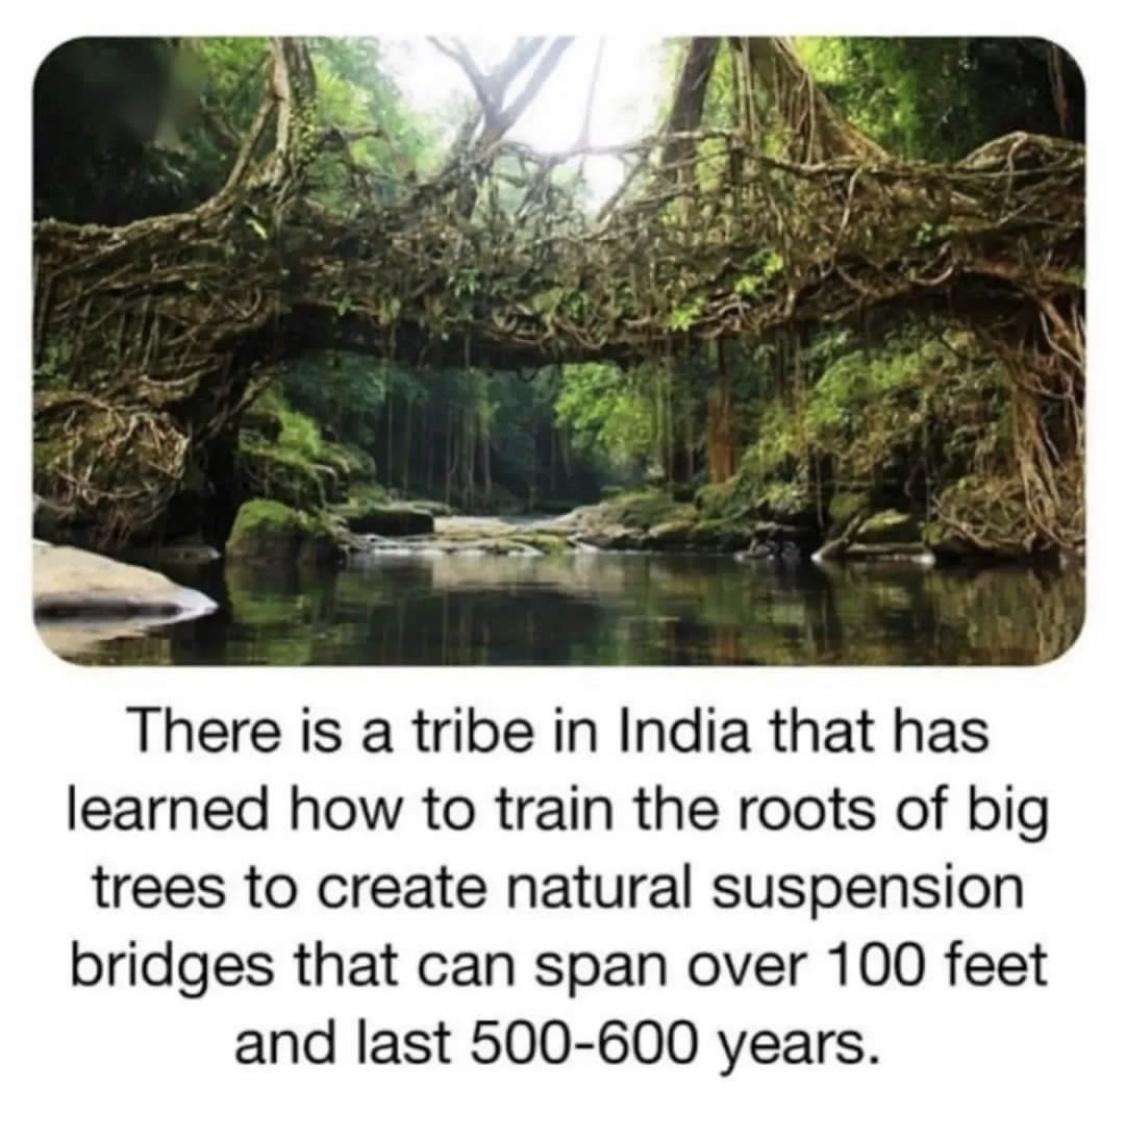 funny pics and randoms - living root bridges hd - There is a tribe in India that has learned how to train the roots of big trees to create natural suspension bridges that can span over 100 feet and last 500600 years.